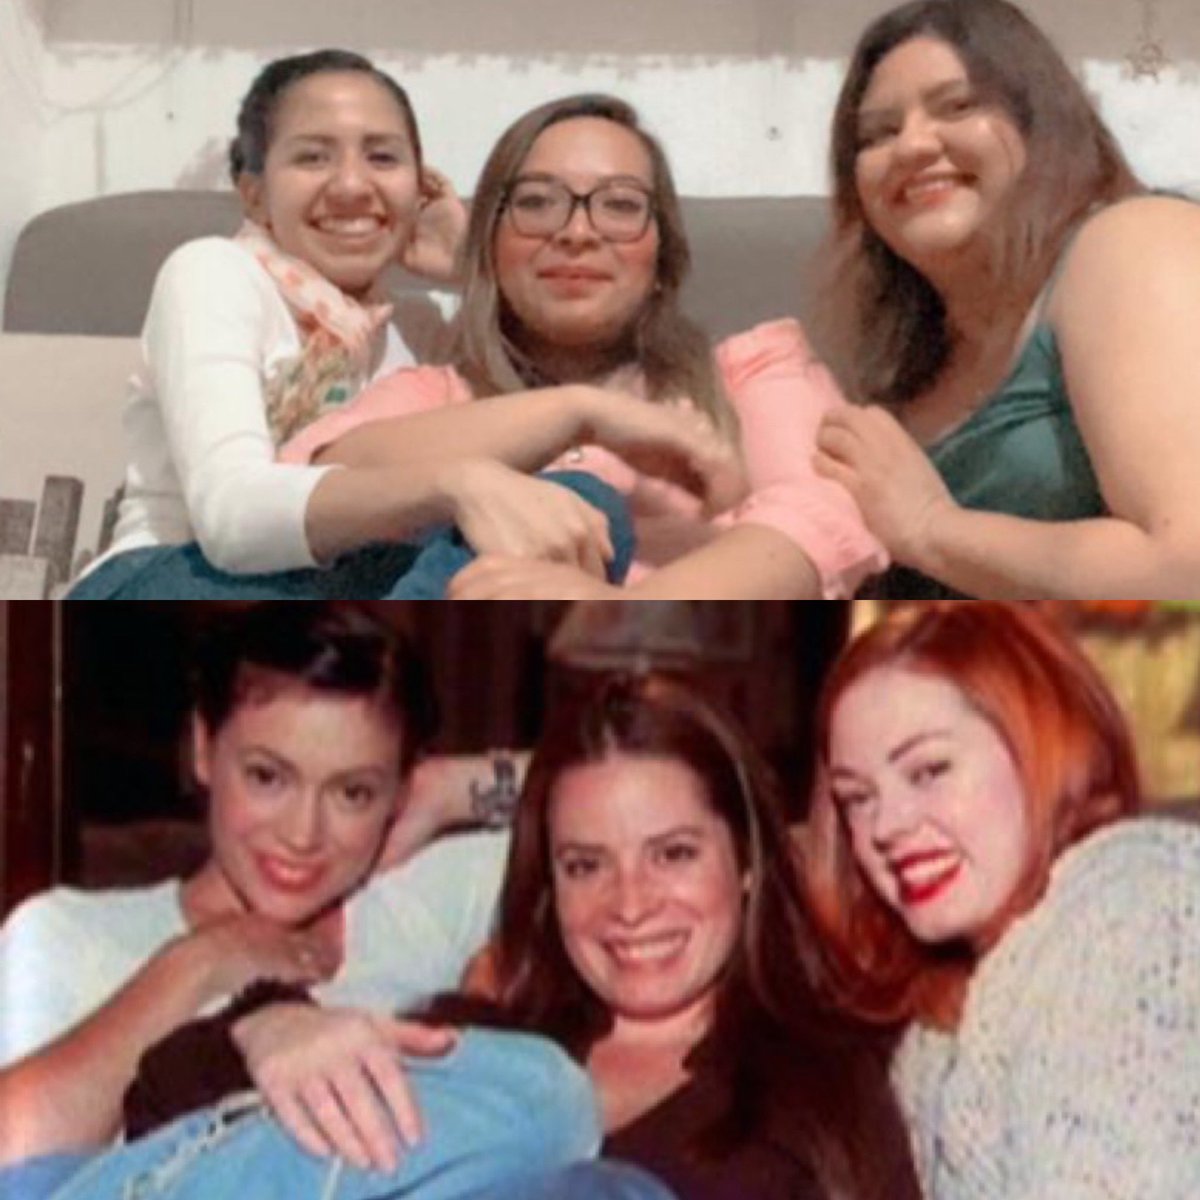 Forever charmed @H_Combs @Alyssa_Milano @rosemcgowan 
Here you have a big fans! https://t.co/PjdjDnJH2m